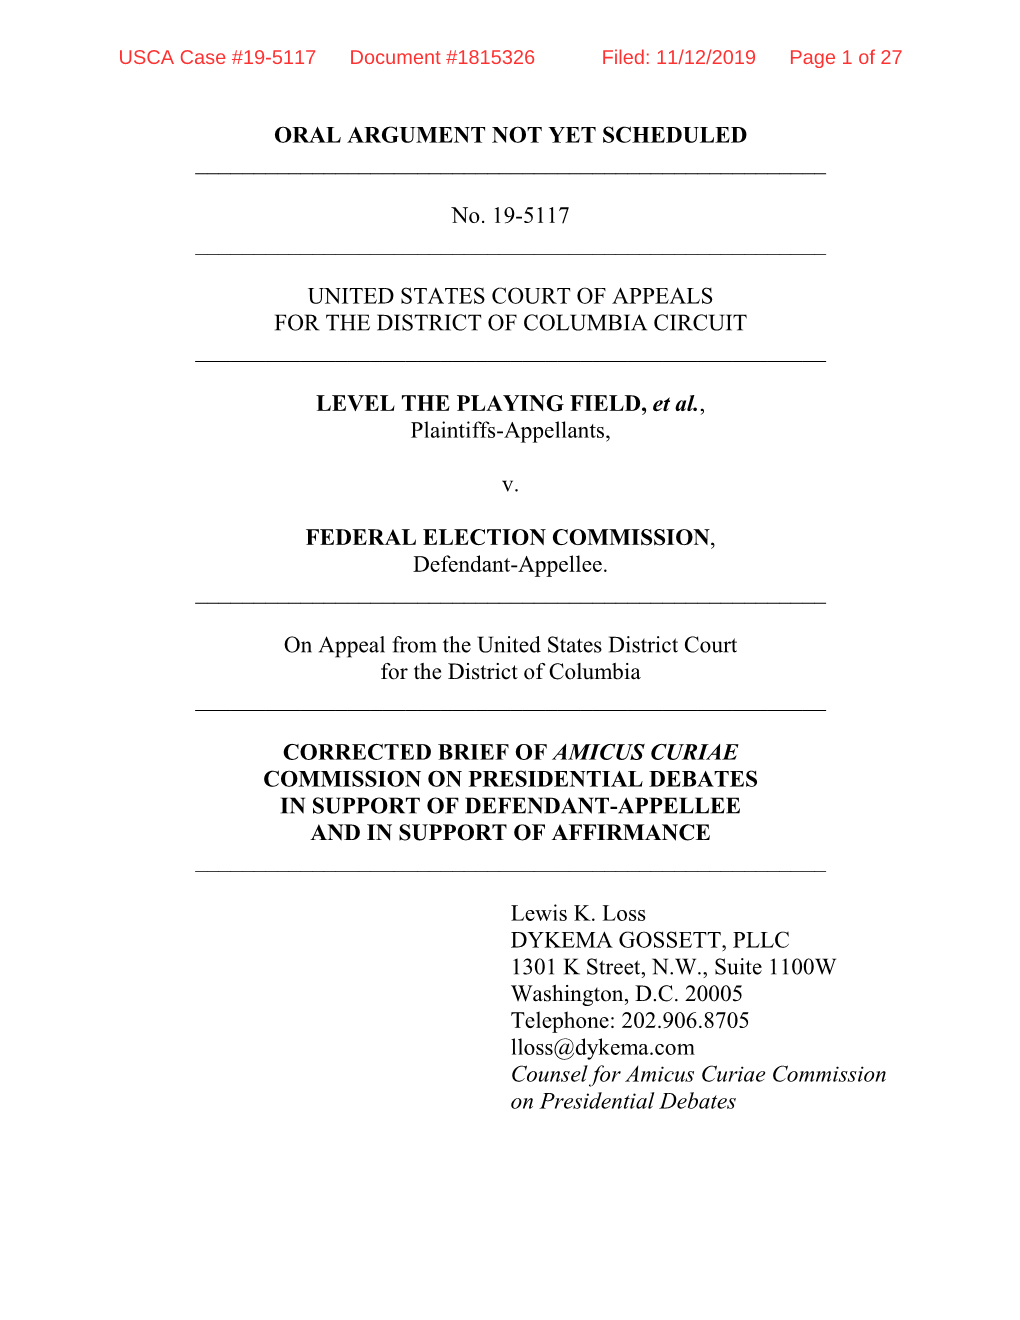 Corrected Brief of Amicus Curiae Commission on Presidential Debates in Support of Defendant-Appellee and in Support of Affirmance ______